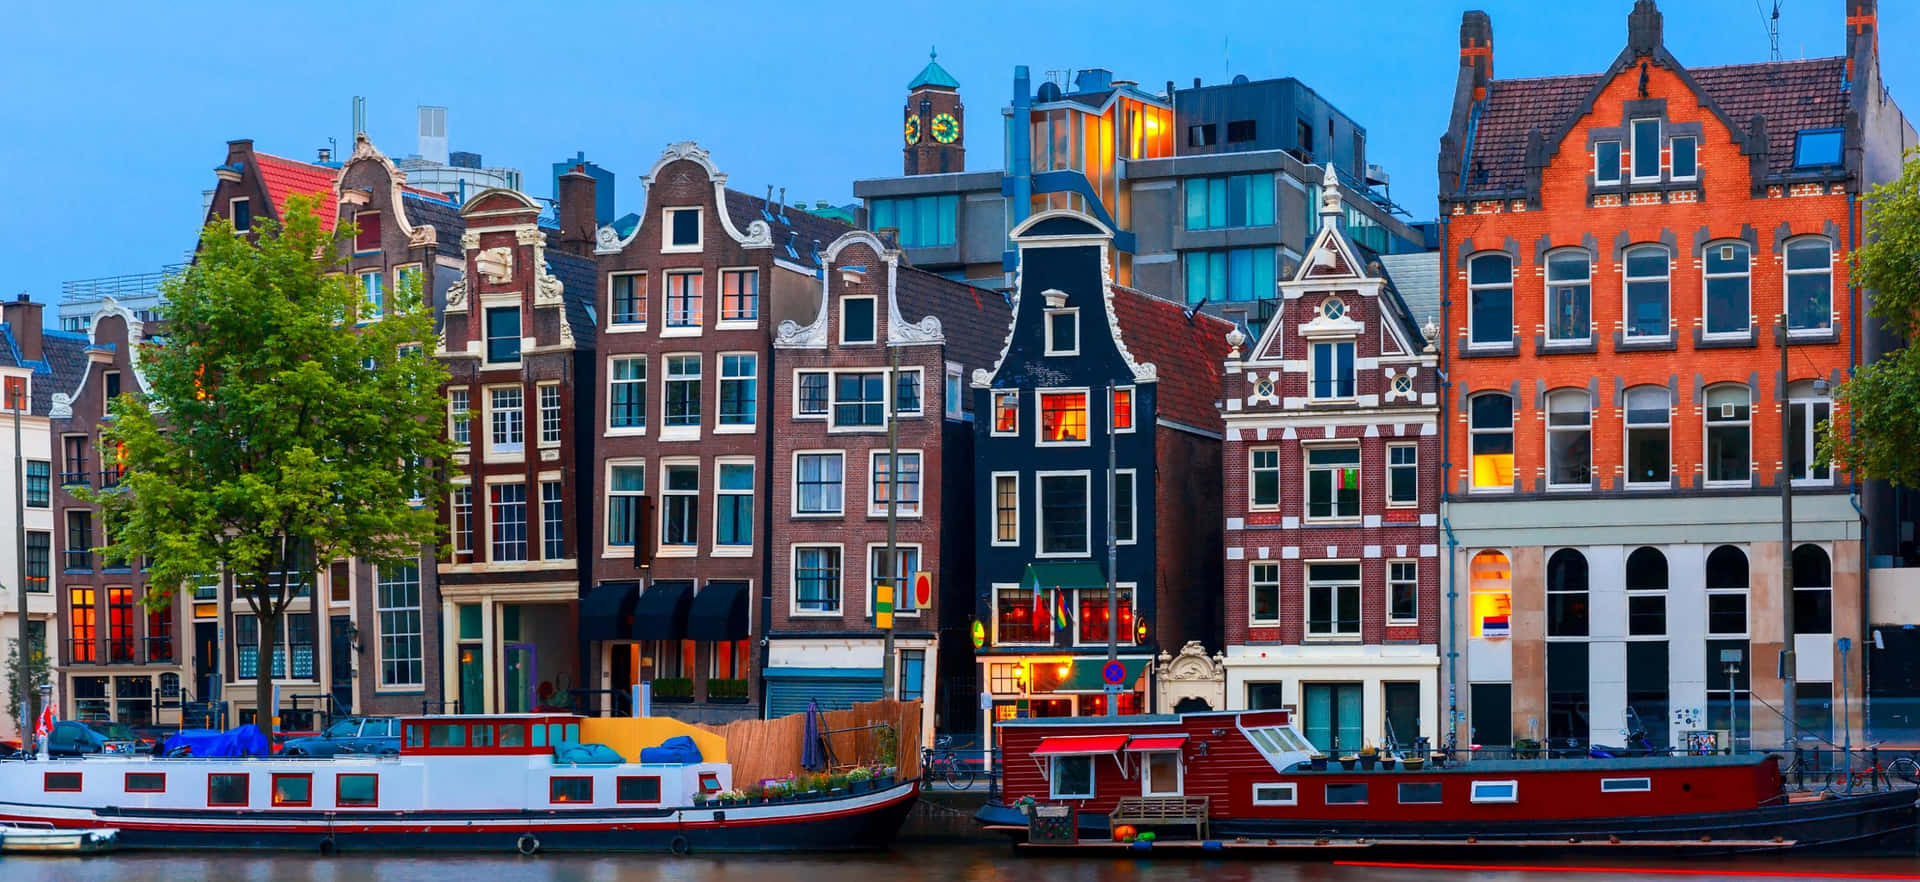 Explore the canals of Amsterdam, Netherlands